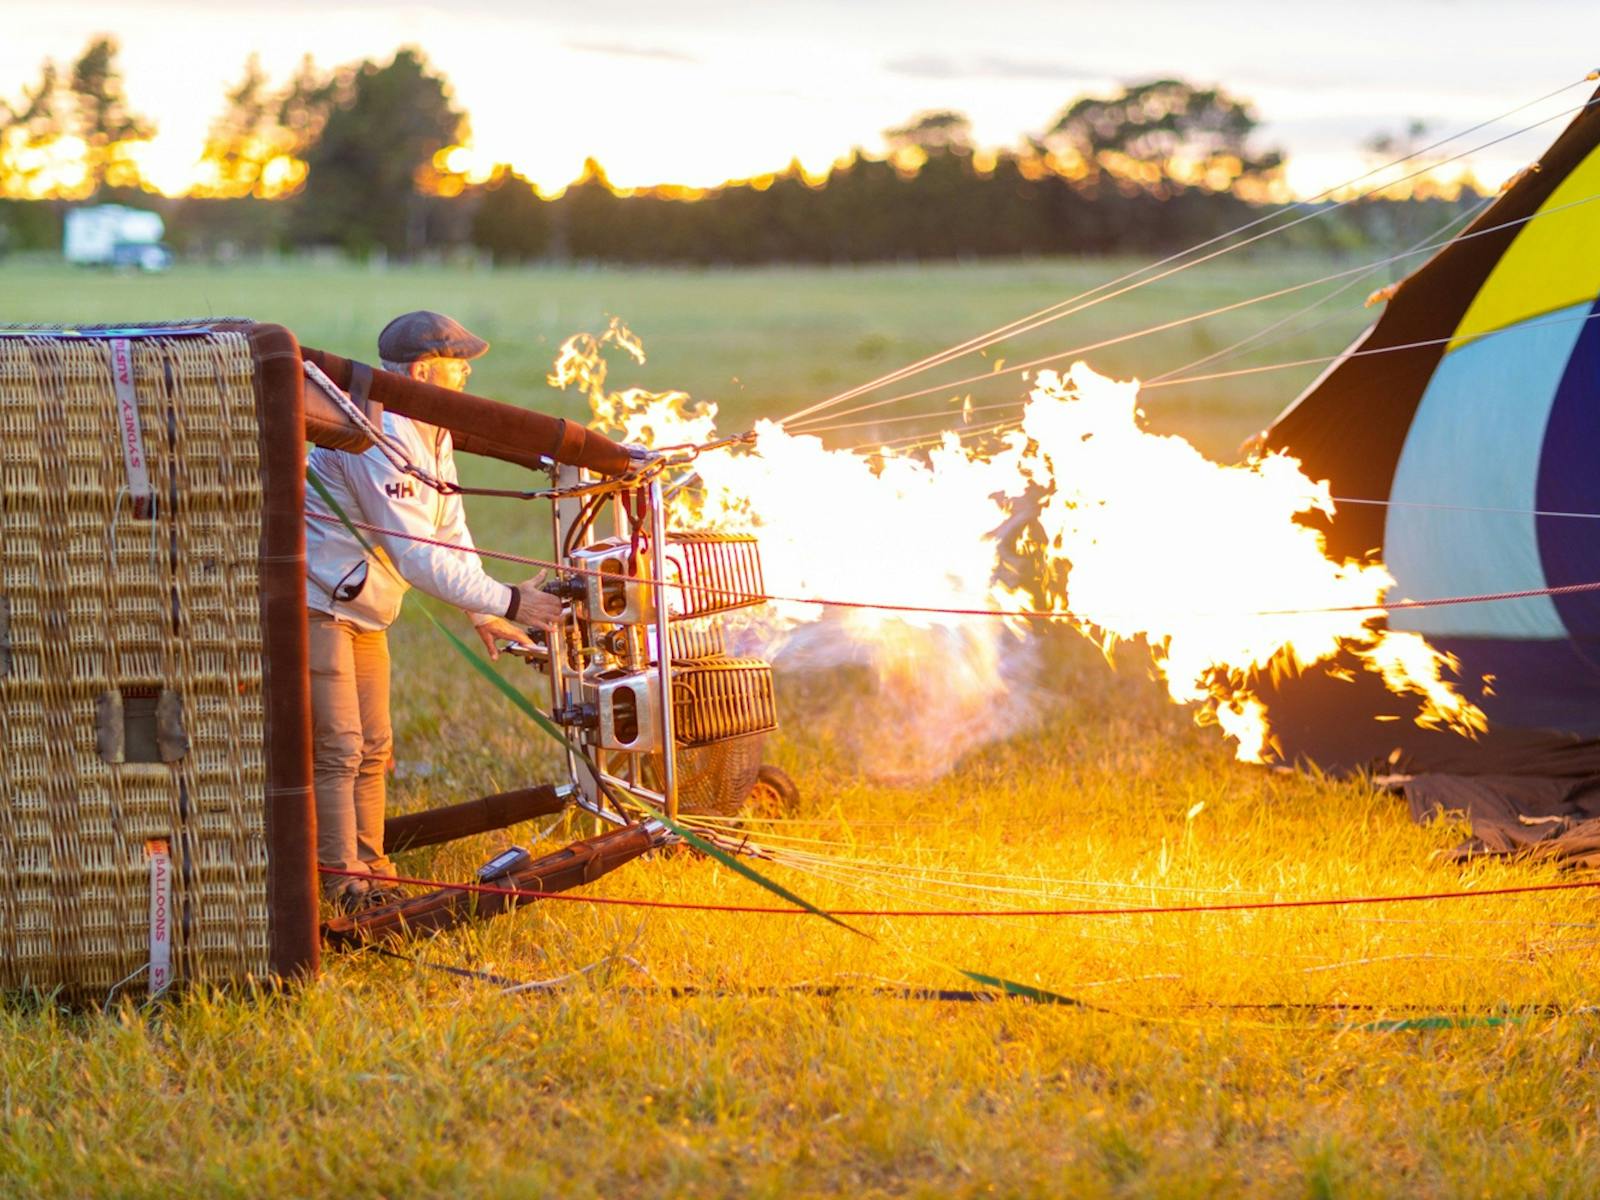 The balloon burner heats the air in the cold inflated "envelope " and making the balloon rise .